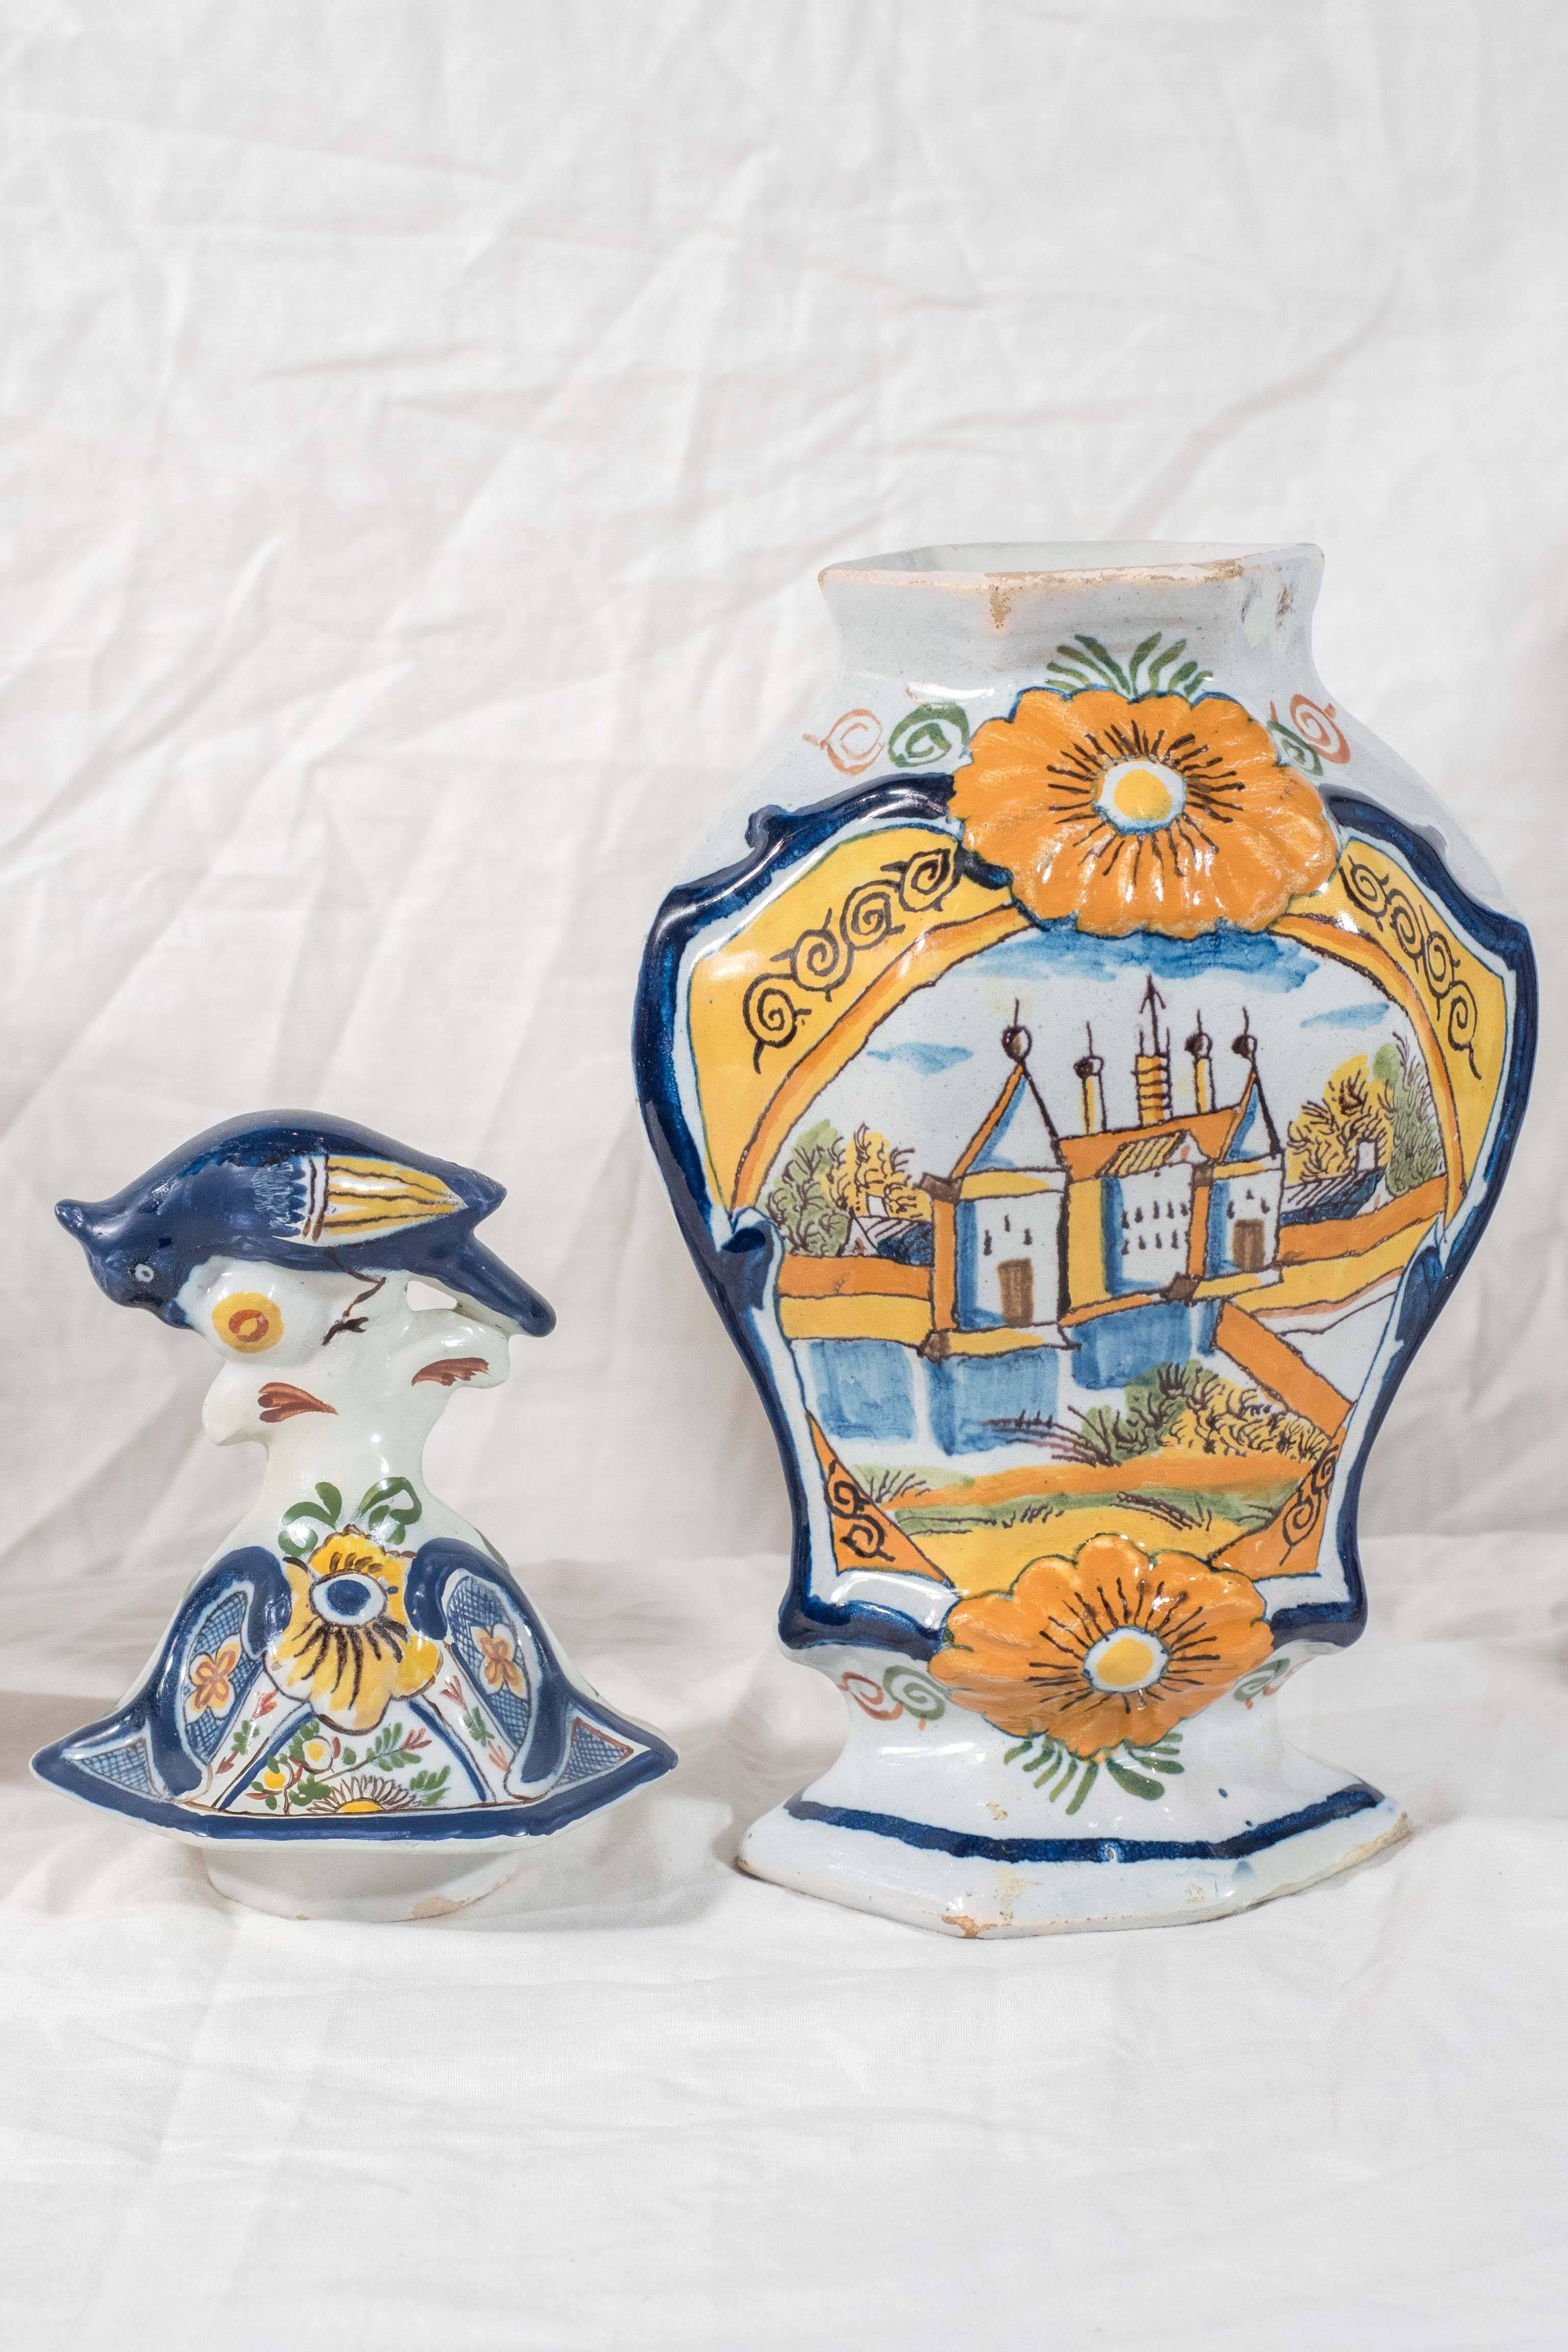  Garniture of Five Delft Vases Painted in Colorful Polychrome IN STOCK 2